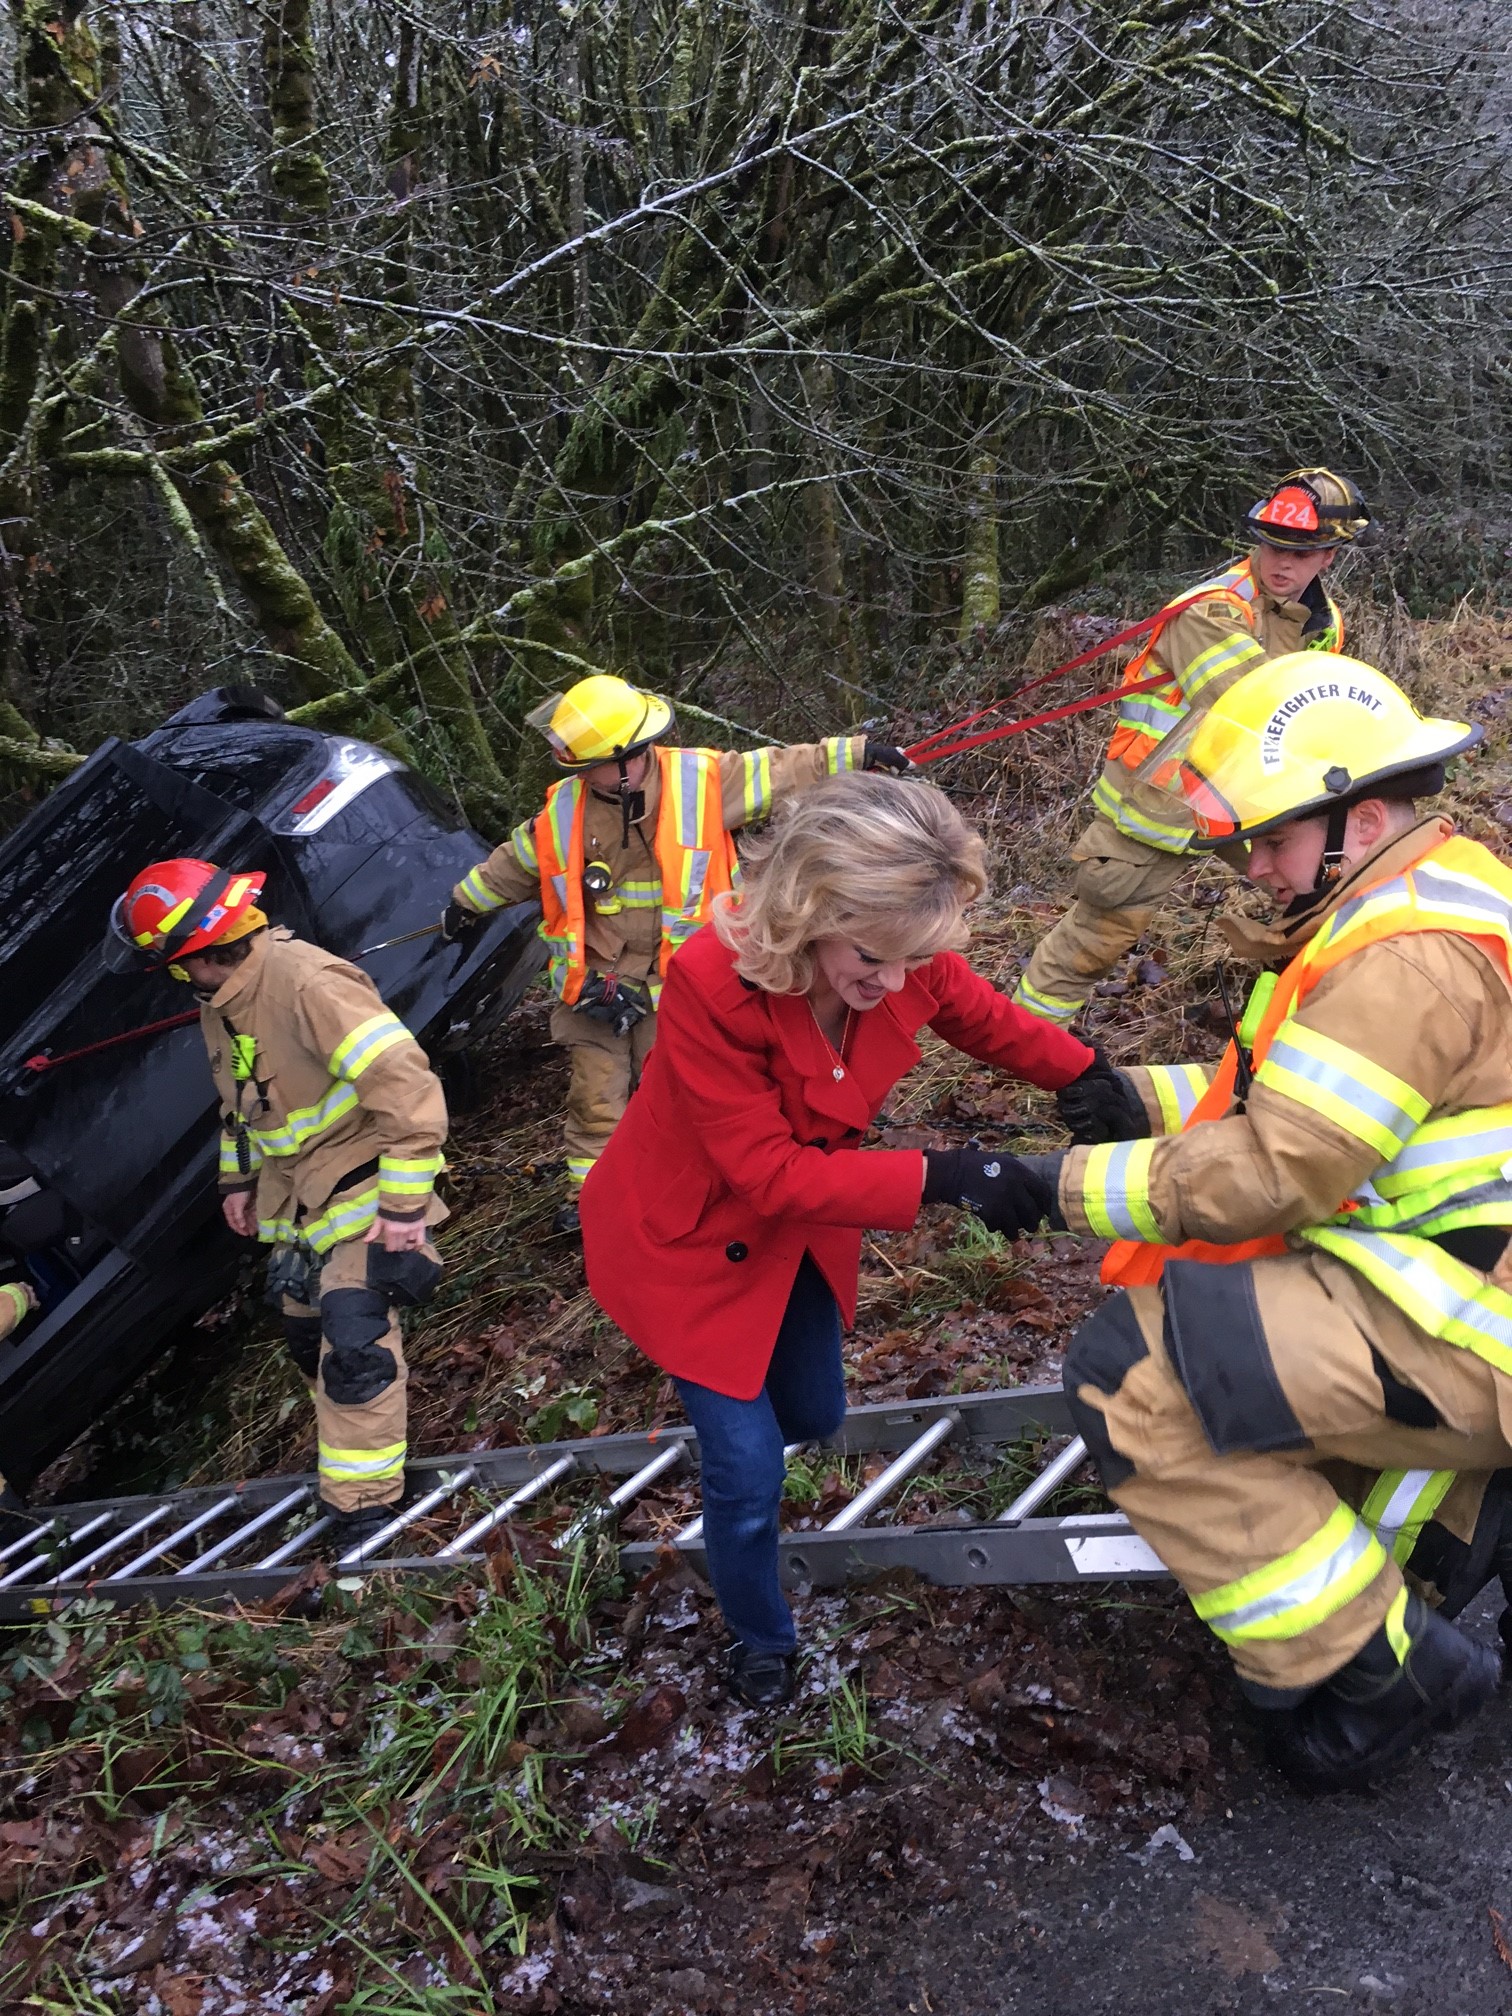 Firefighters rescued a woman and her three children who were trapped in a minivan after it went down an embankment Monday morning.